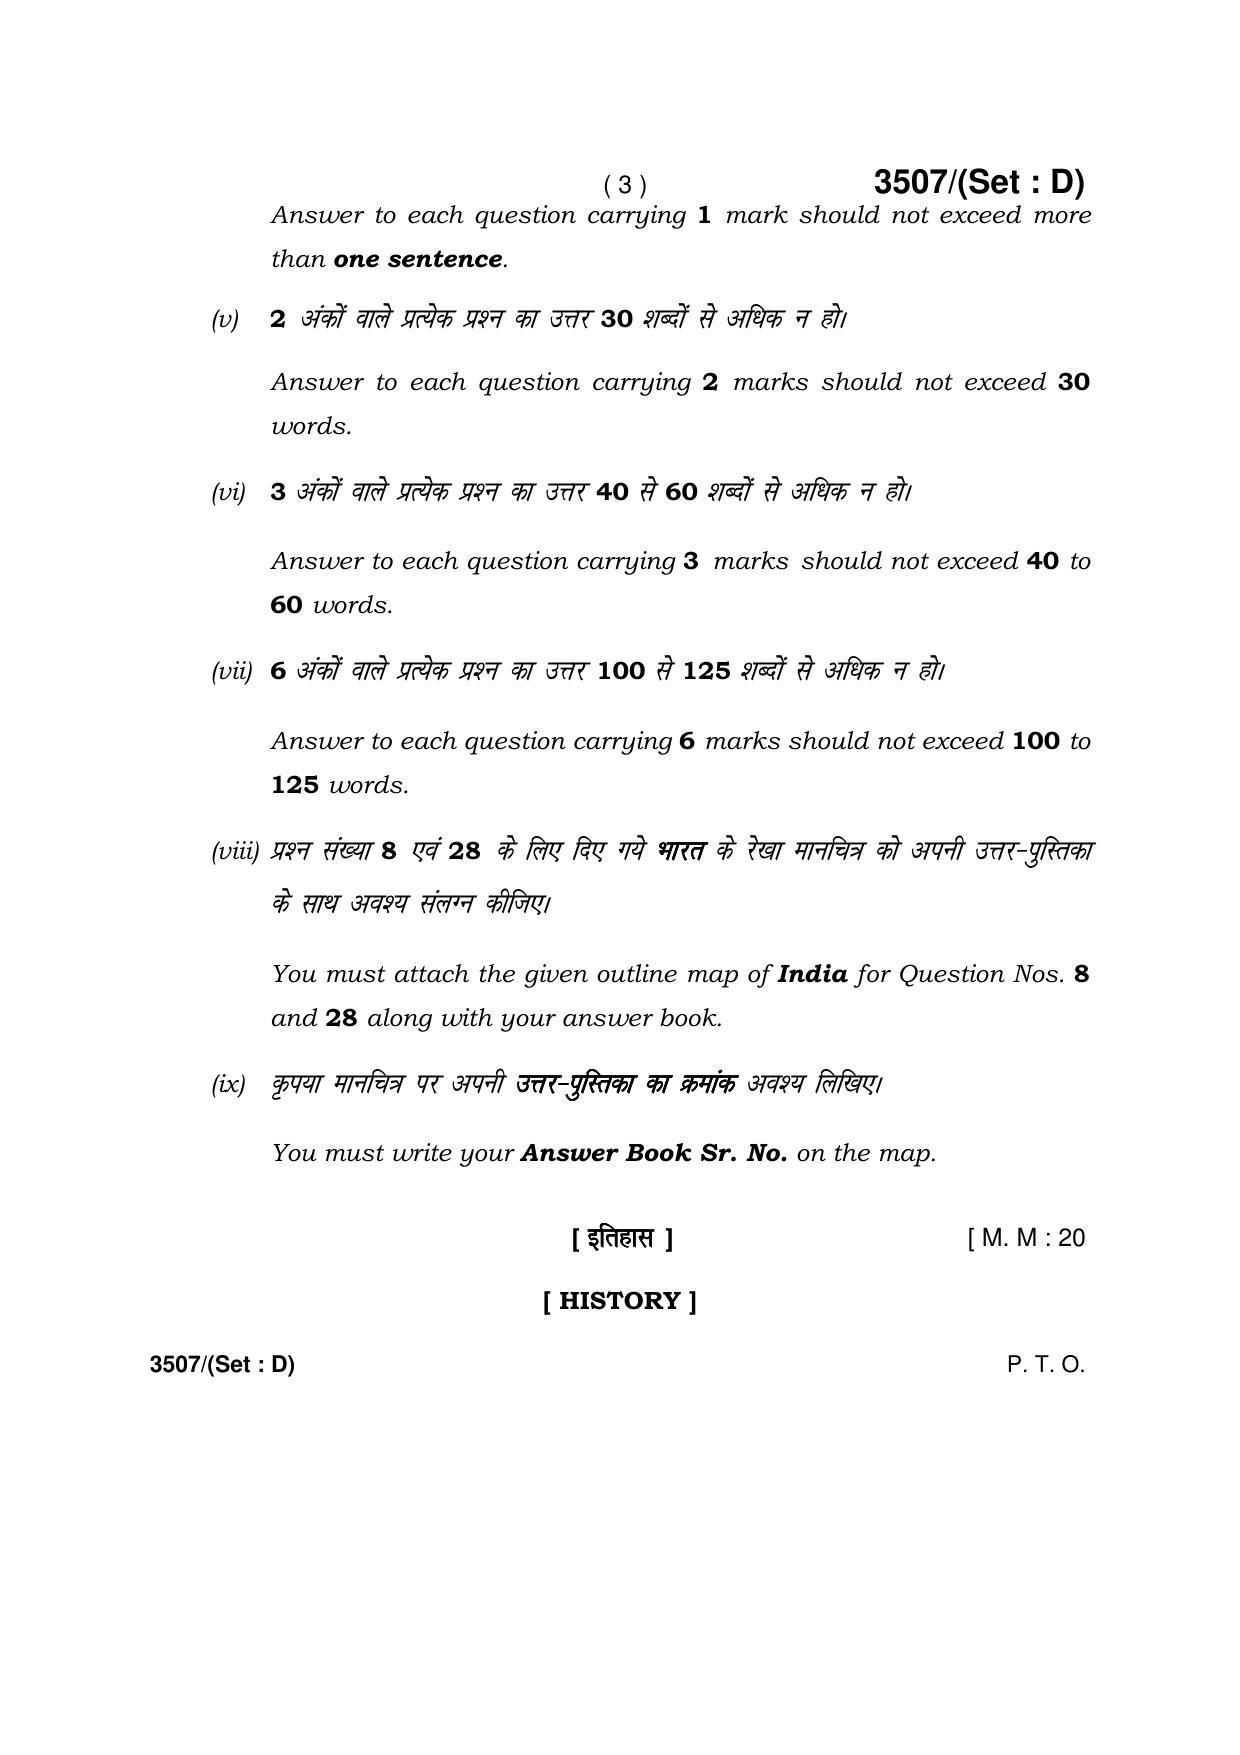 Haryana Board HBSE Class 10 Social Science -D 2018 Question Paper - Page 3